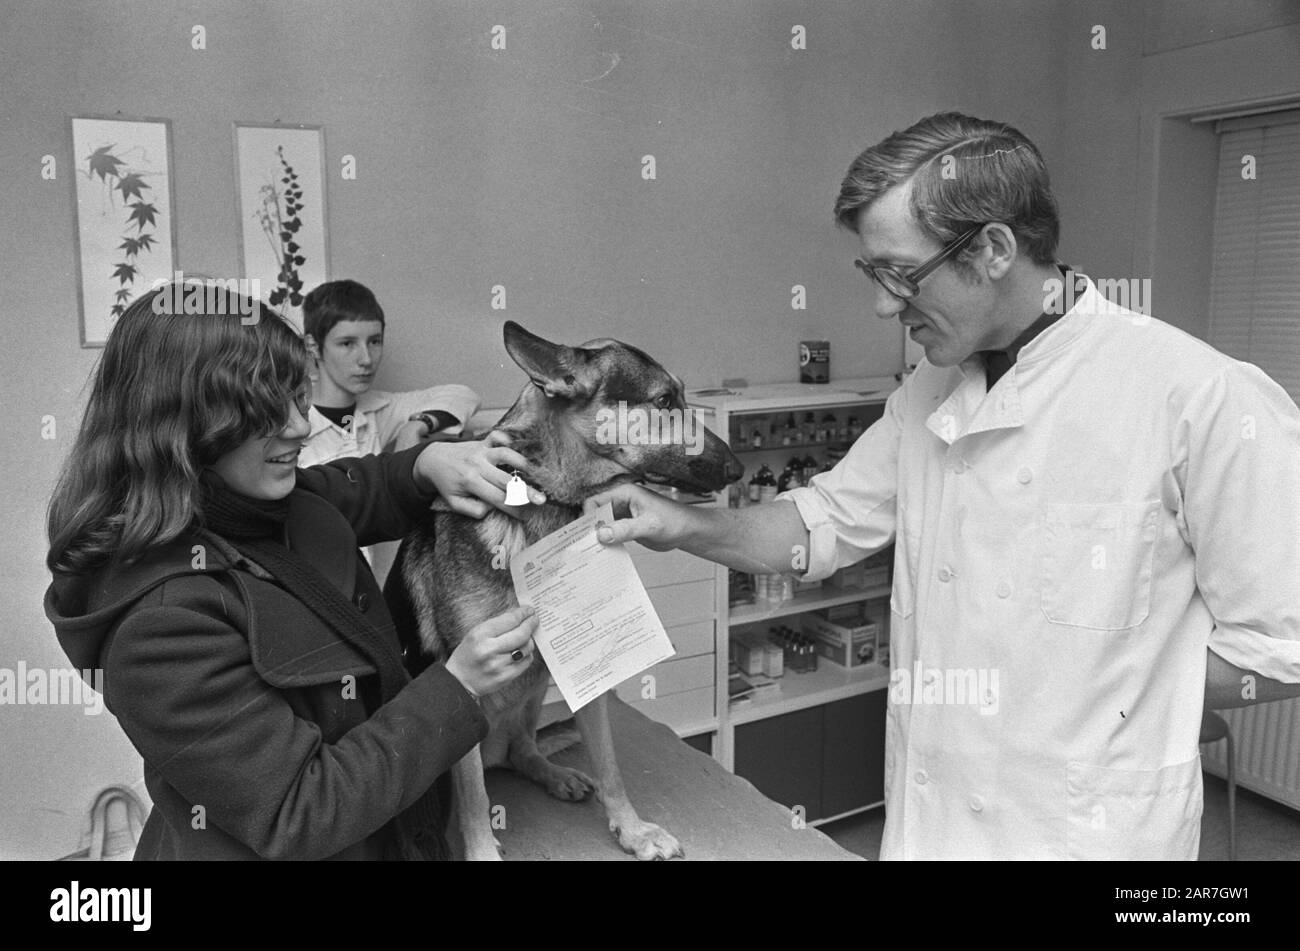 As of May 1st dogs are required to inoculate against rabies; veterinarian shows badge and certificate Date: February 16, 1976 Keywords: Veterinarians, DOGS, certificates, vaccinations Stock Photo